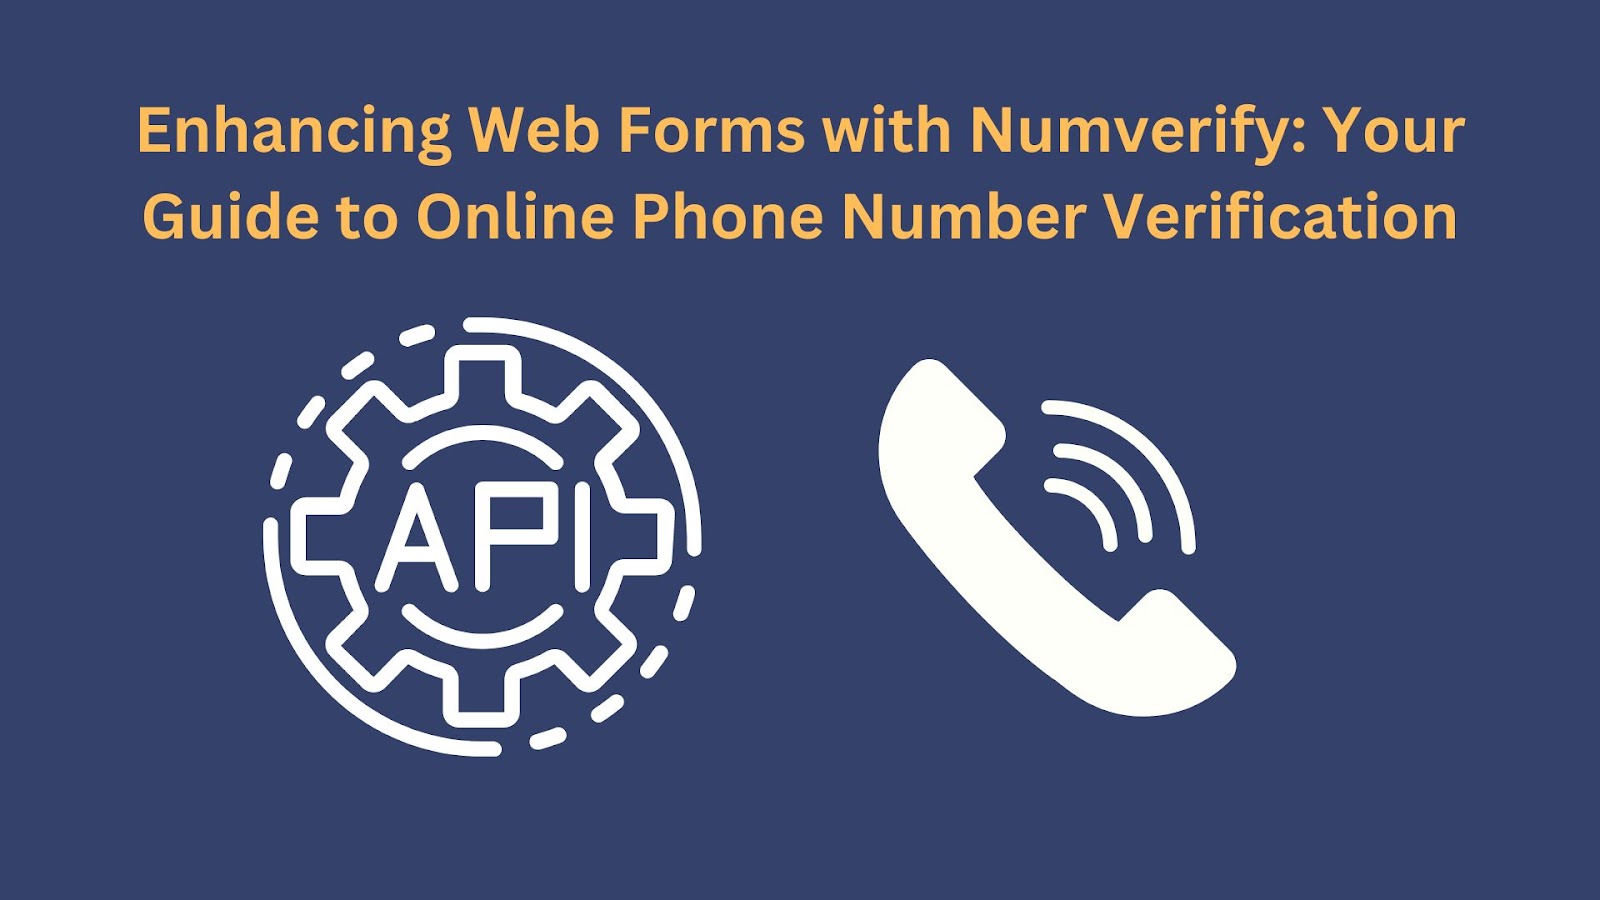 Enhancing Web Forms with Numverify: Your Guide to Online Phone Number Verification - Numverify